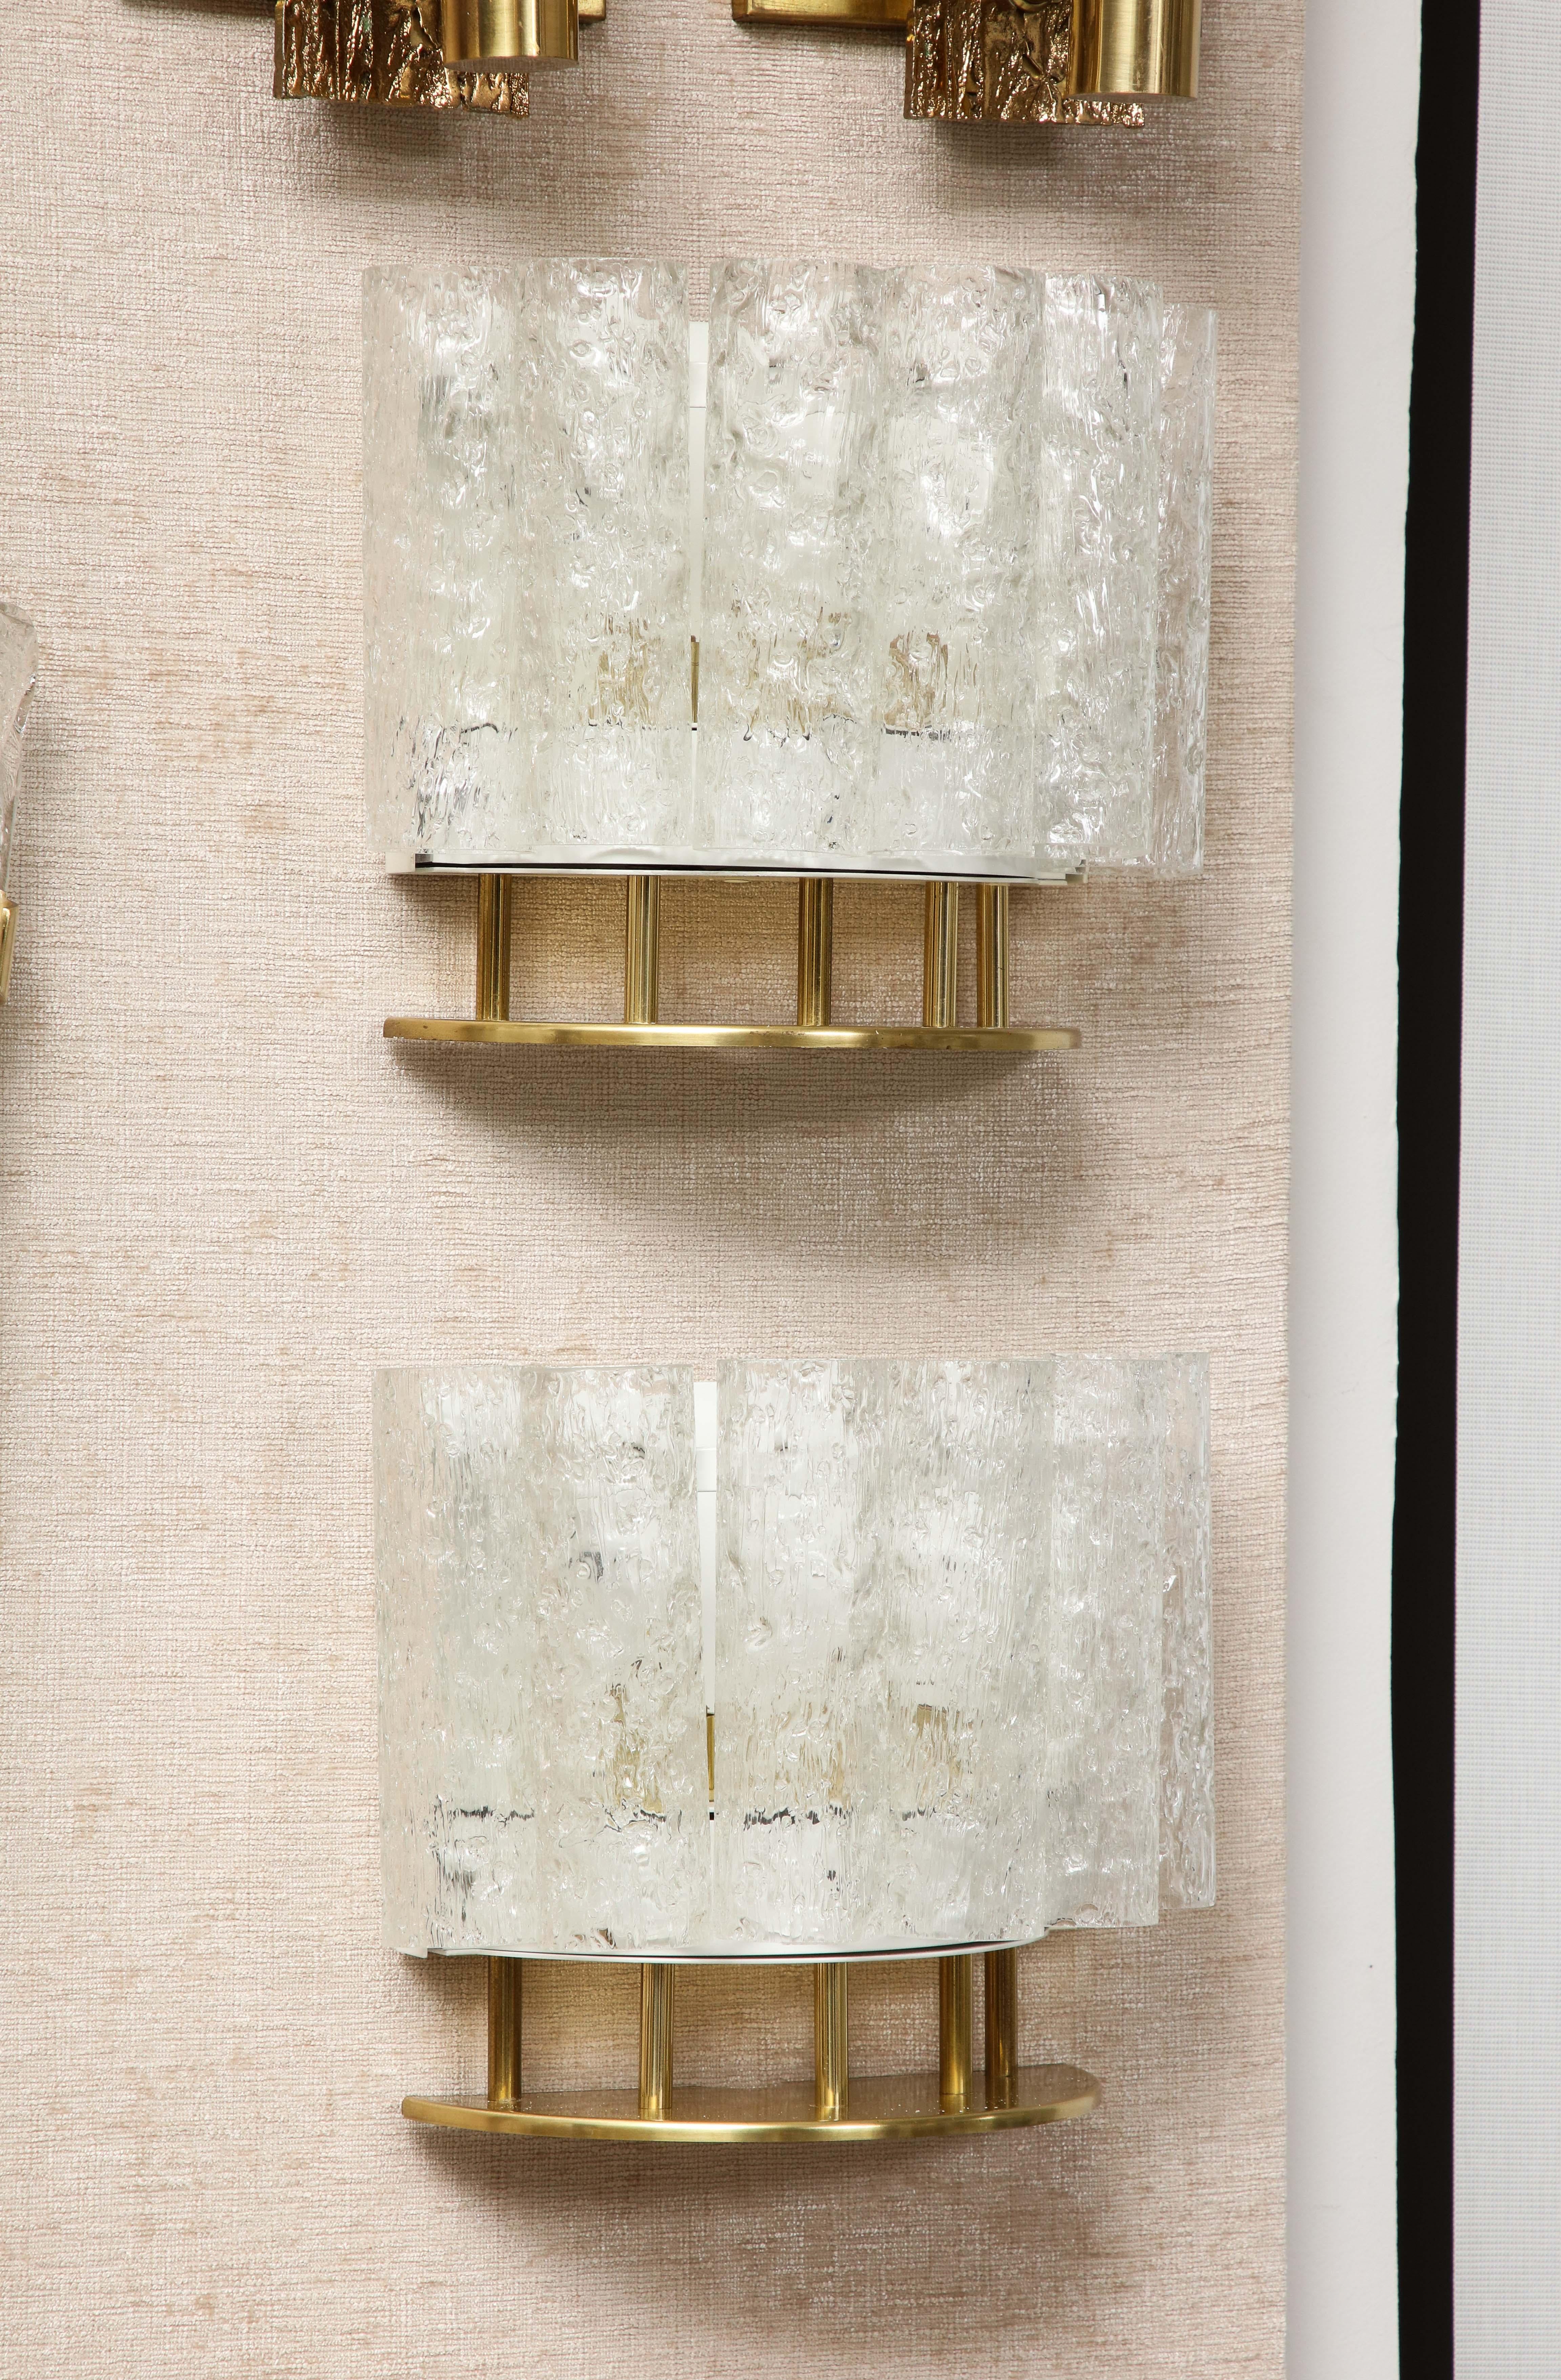 Pair of 1960's Brass and Textured Glass sconces by Doria lighting company.
Six textured glass tubes / cylinders form a Demi lune to create a shield of glass illuminated by two Newly rewired candelabra light sockets.
40 Watts per socket  / 80 watts